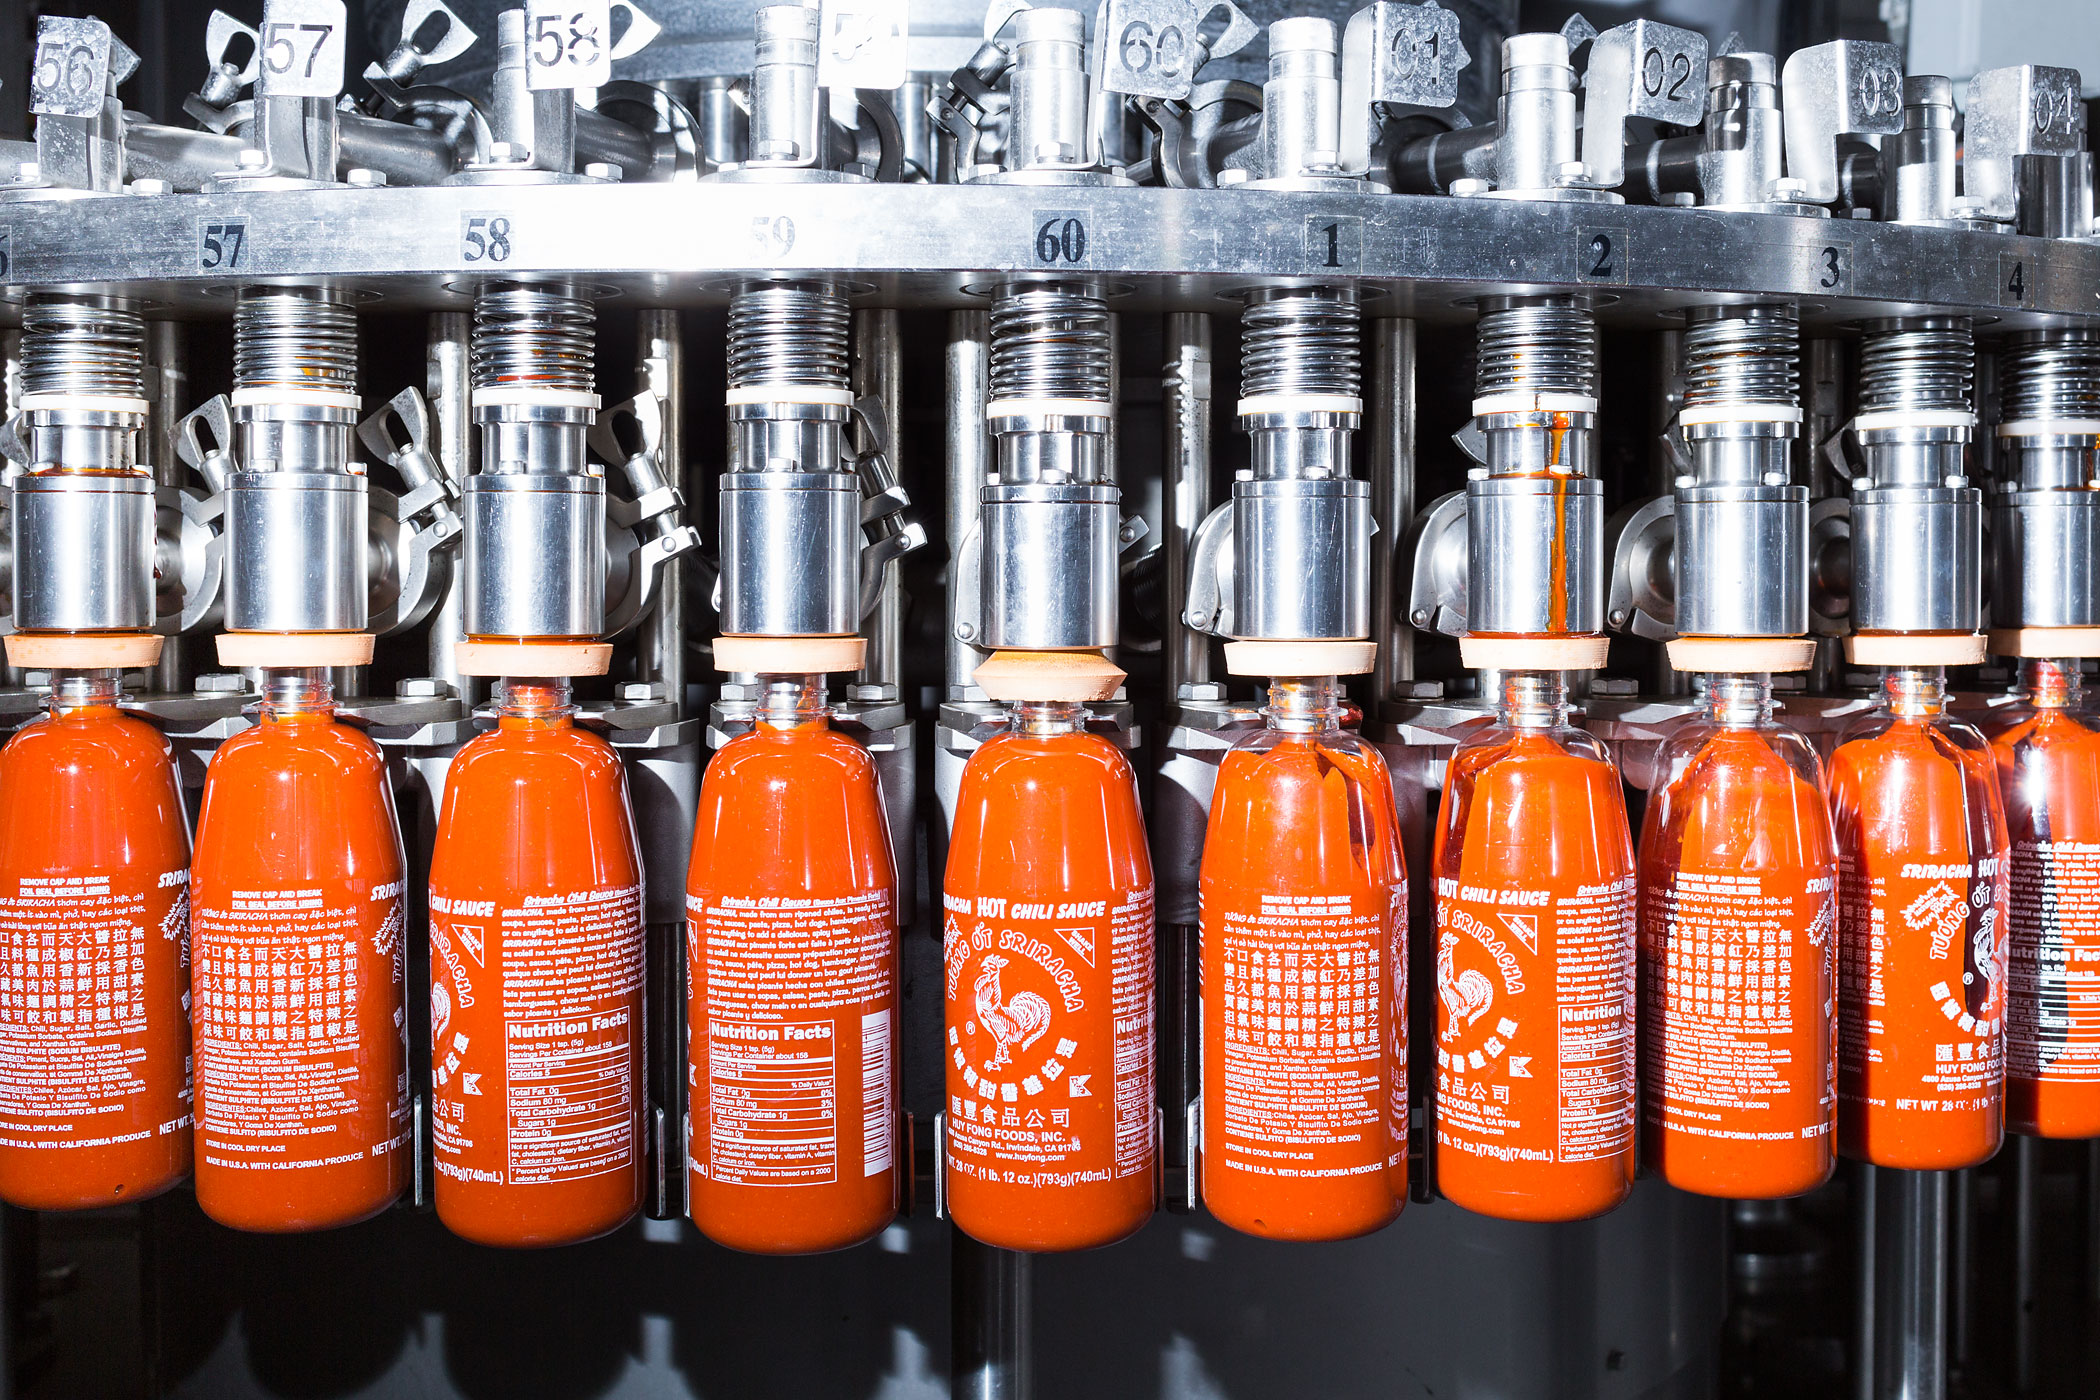 Bottles of Sriracha being filled. When CEO and founder David Tran started making chili sauce in Vietnam, he and his family hand-filled bottles with spoons.